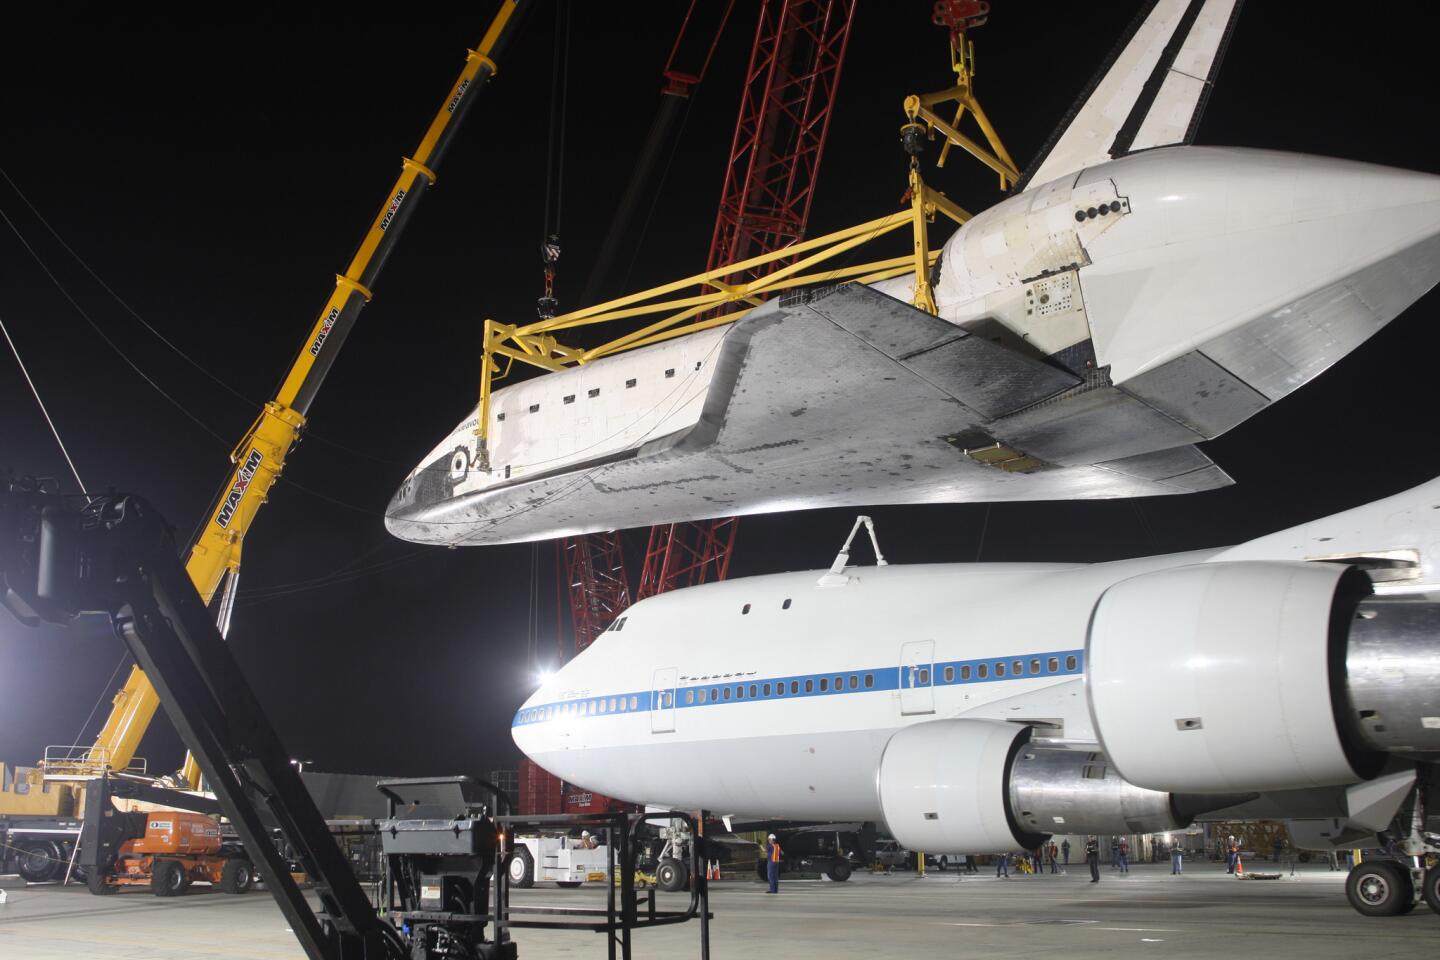 The retired space shuttle Endeavour is lifted off a NASA Boeing 747 transport plane at Los Angeles International Airport on its way to its final destination at the California Science Center on Sept. 22, 2012.